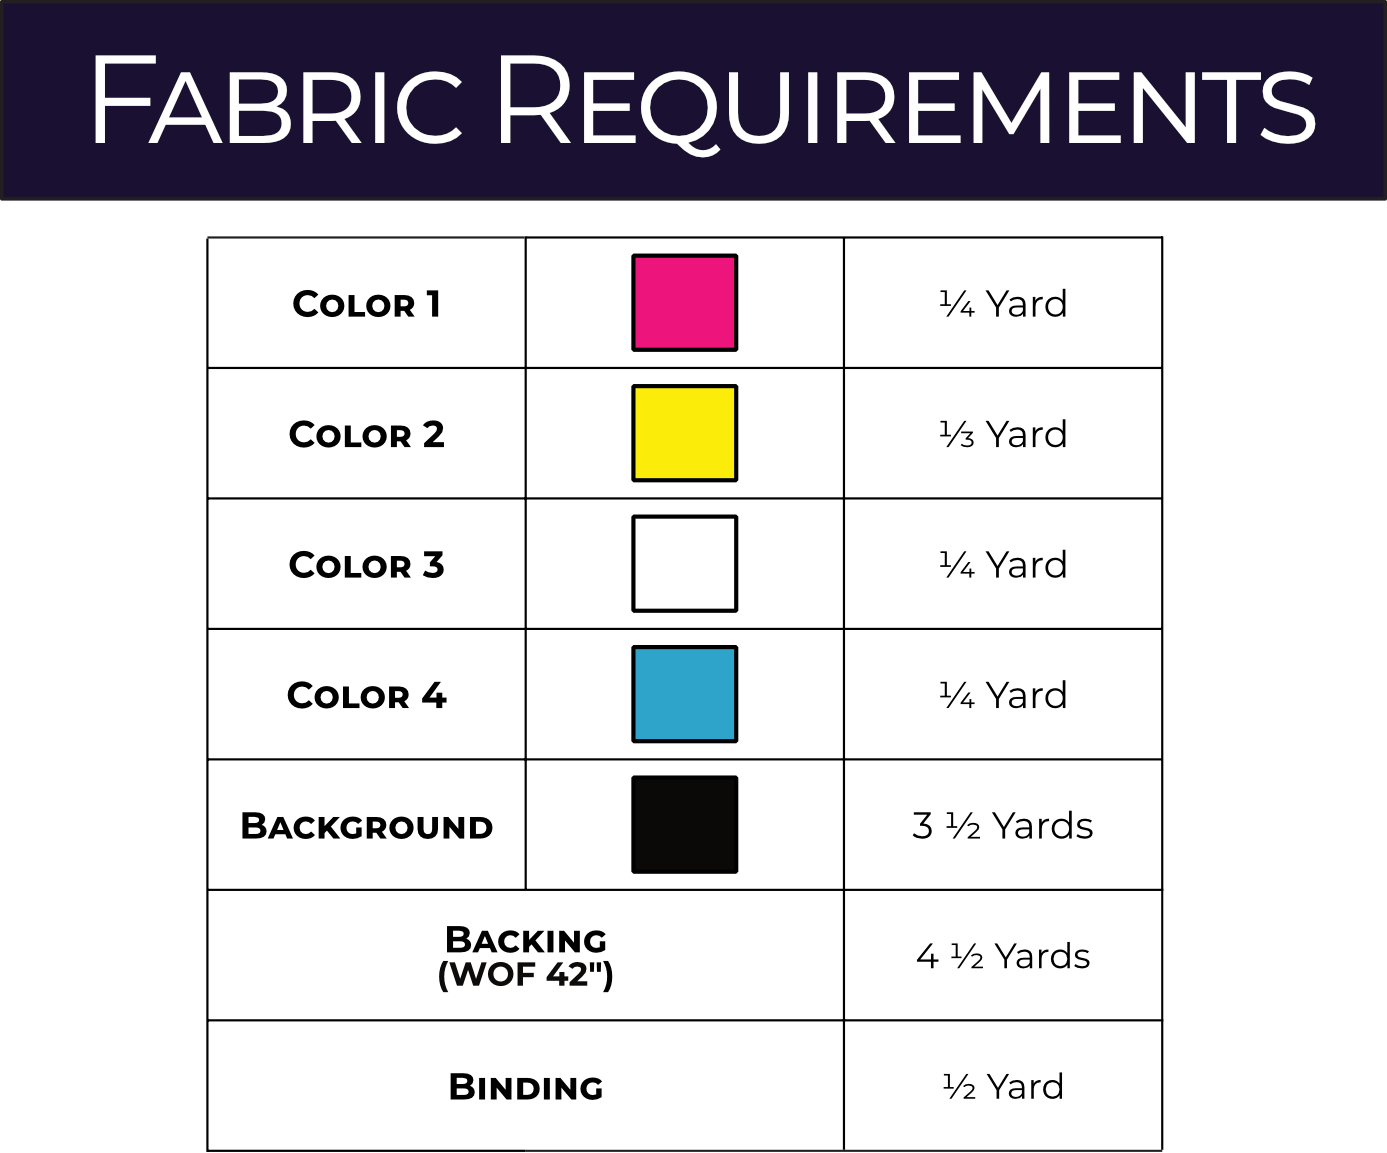 Golden Gate Fabric Requirements.png